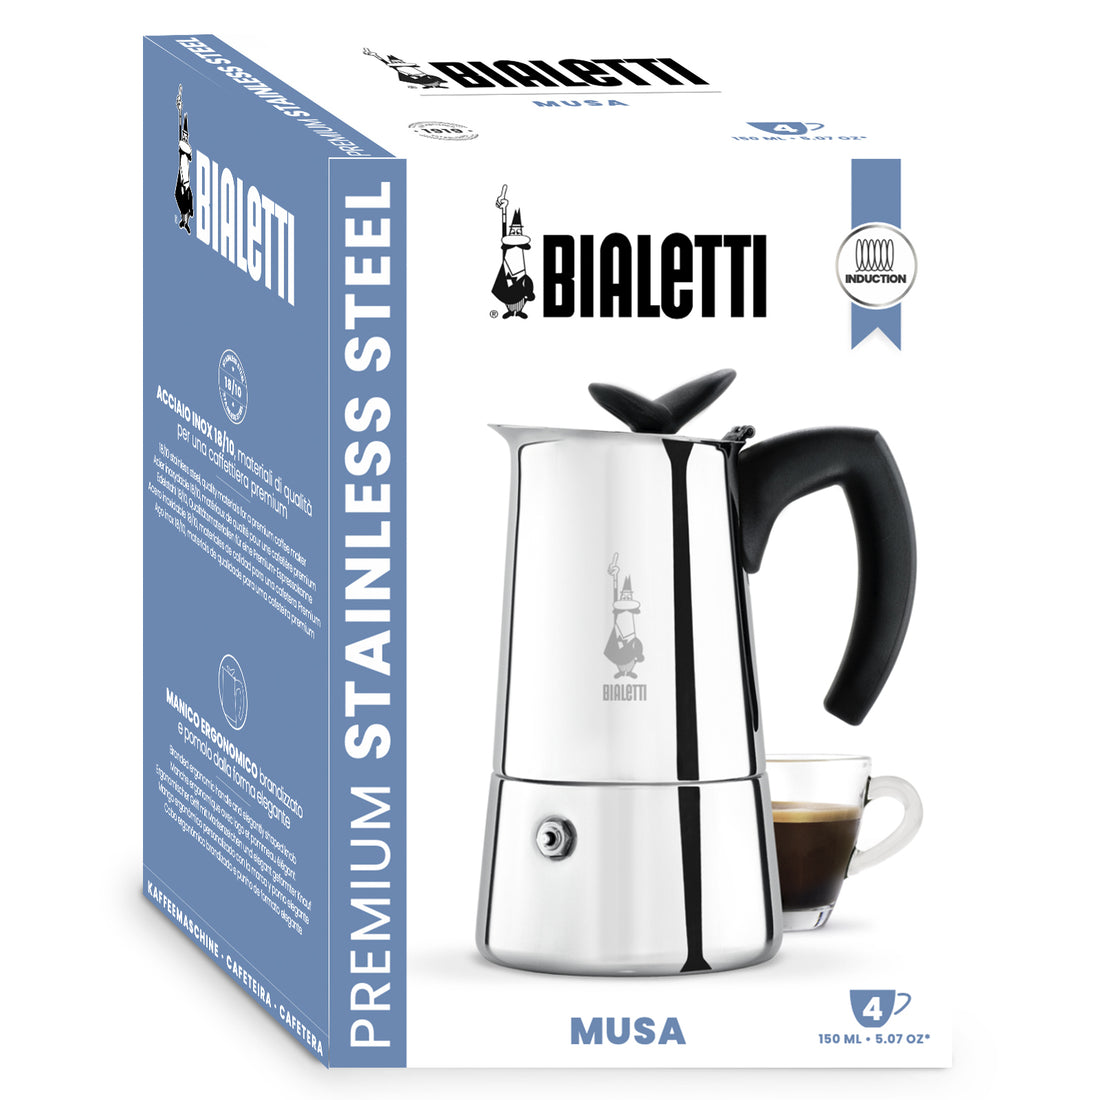 Bialetti Musa Stovetop Coffee Maker 4 Cup – Whole Latte Love